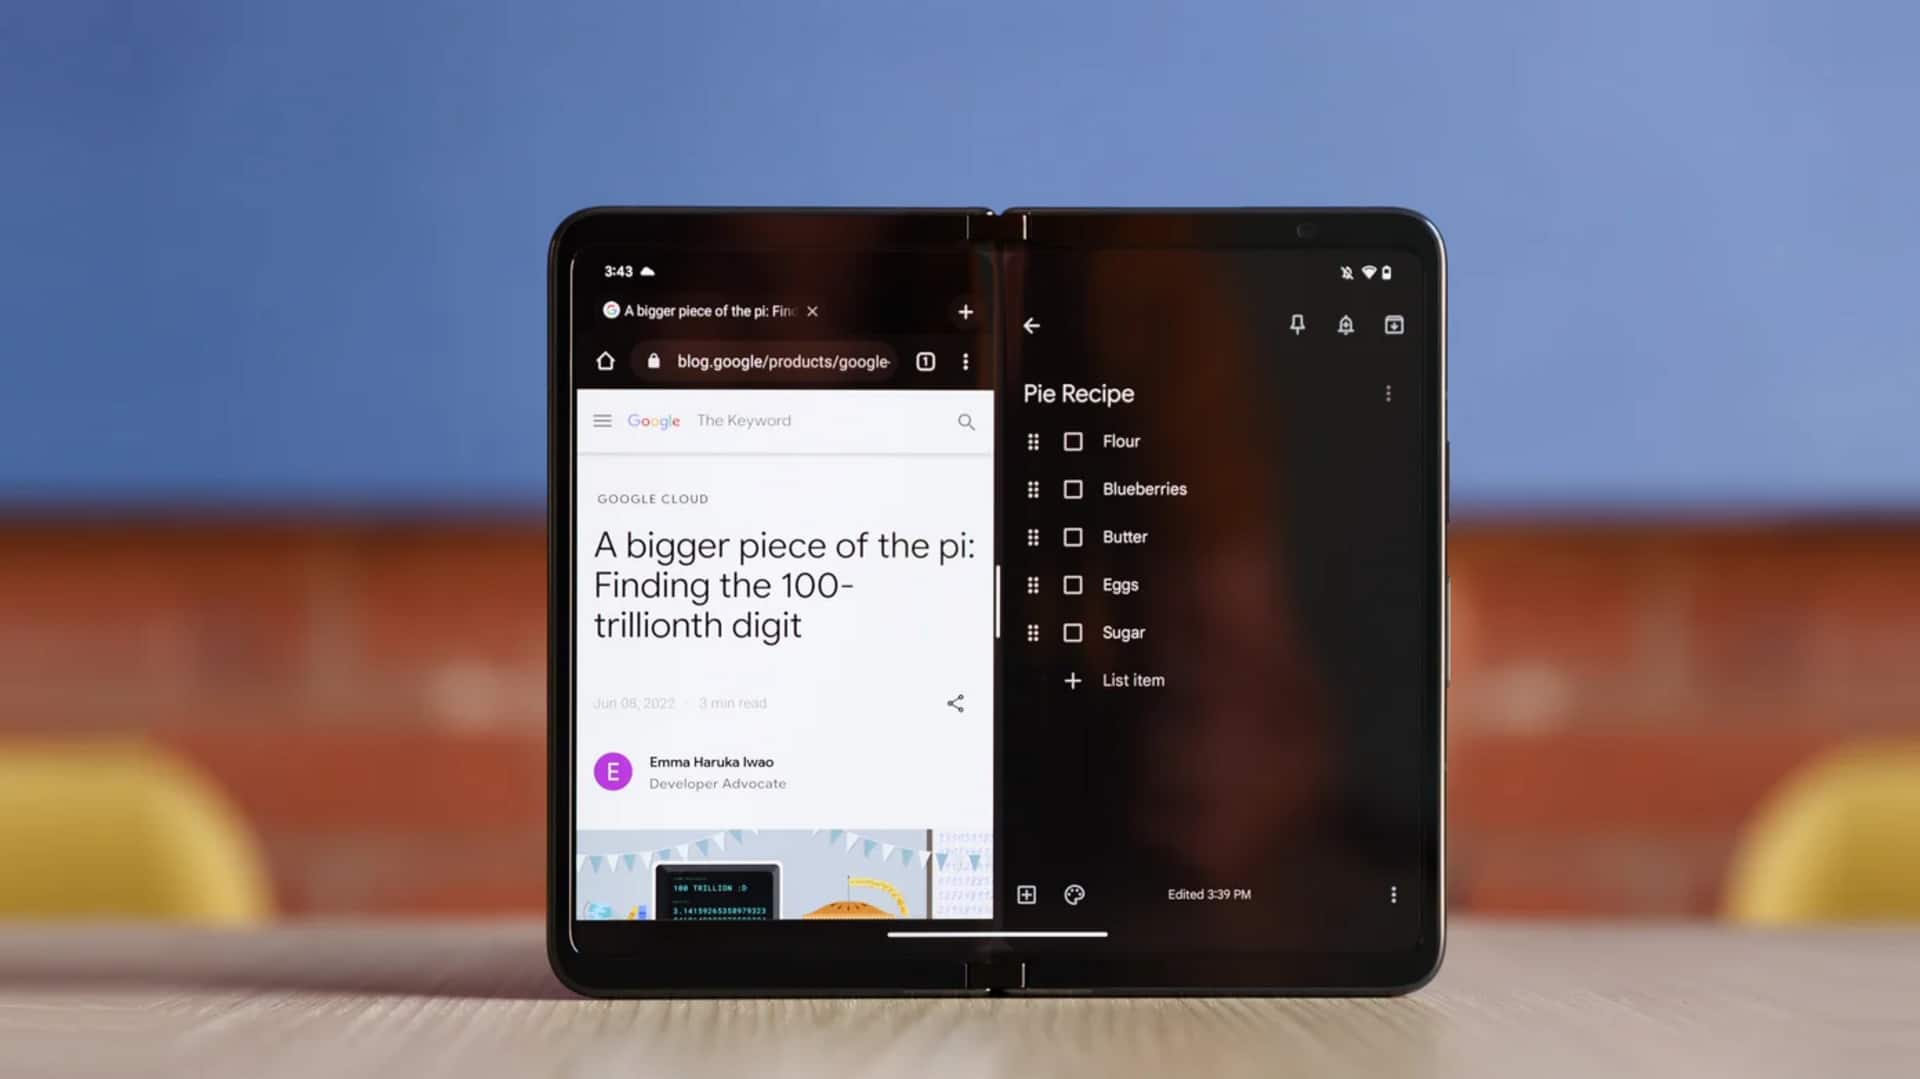 Gmail introduces split-screen view for tablets, foldable smartphones